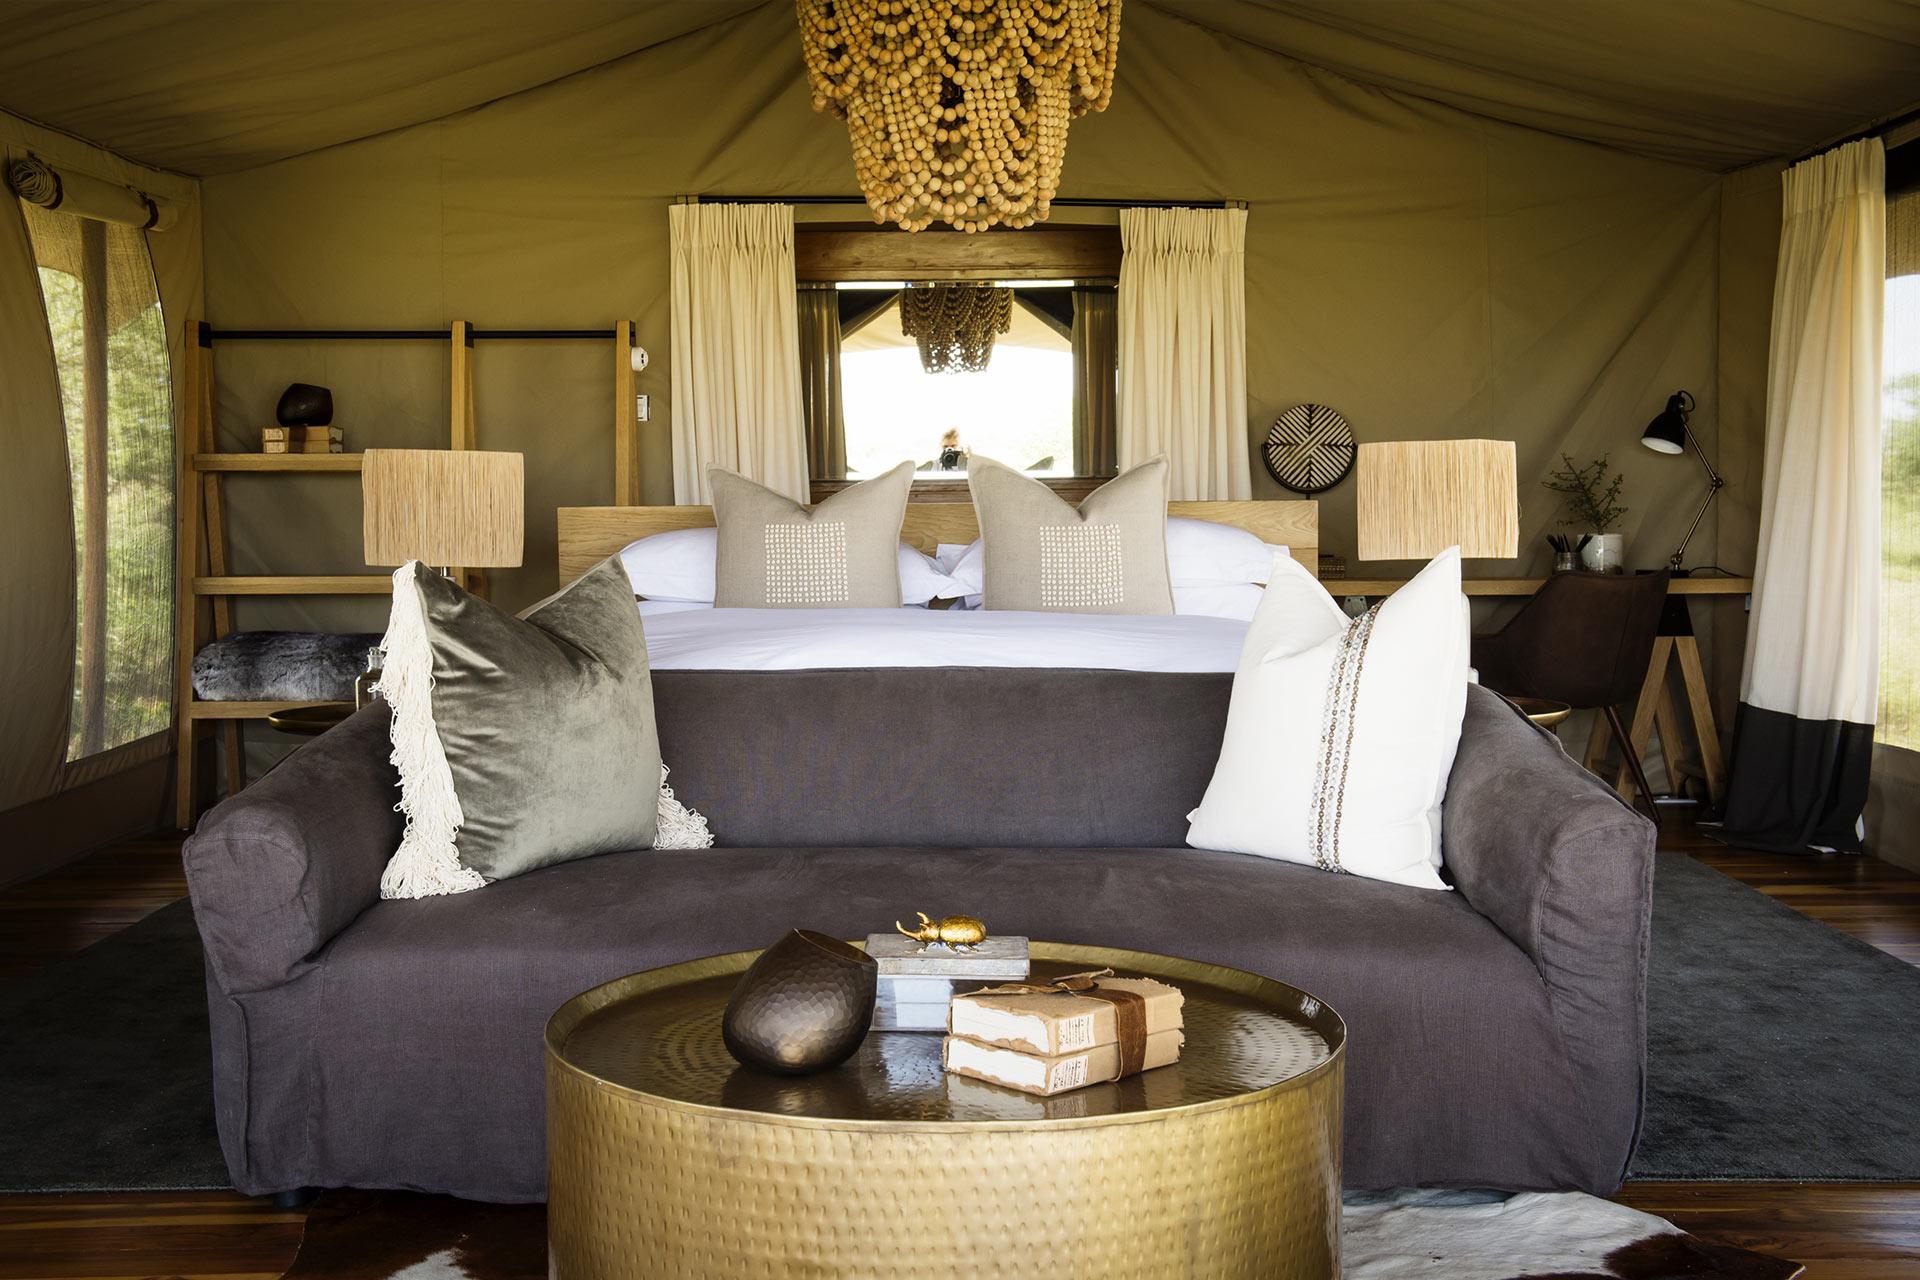 Each tent sits atop a wooden platform raised 30 centimeters from the ground and has a generous sleeping area complete with lounge space. An ensuite bathroom with “his and hers” wash hand basins, large shower and proper flush toilet complete each guest tent